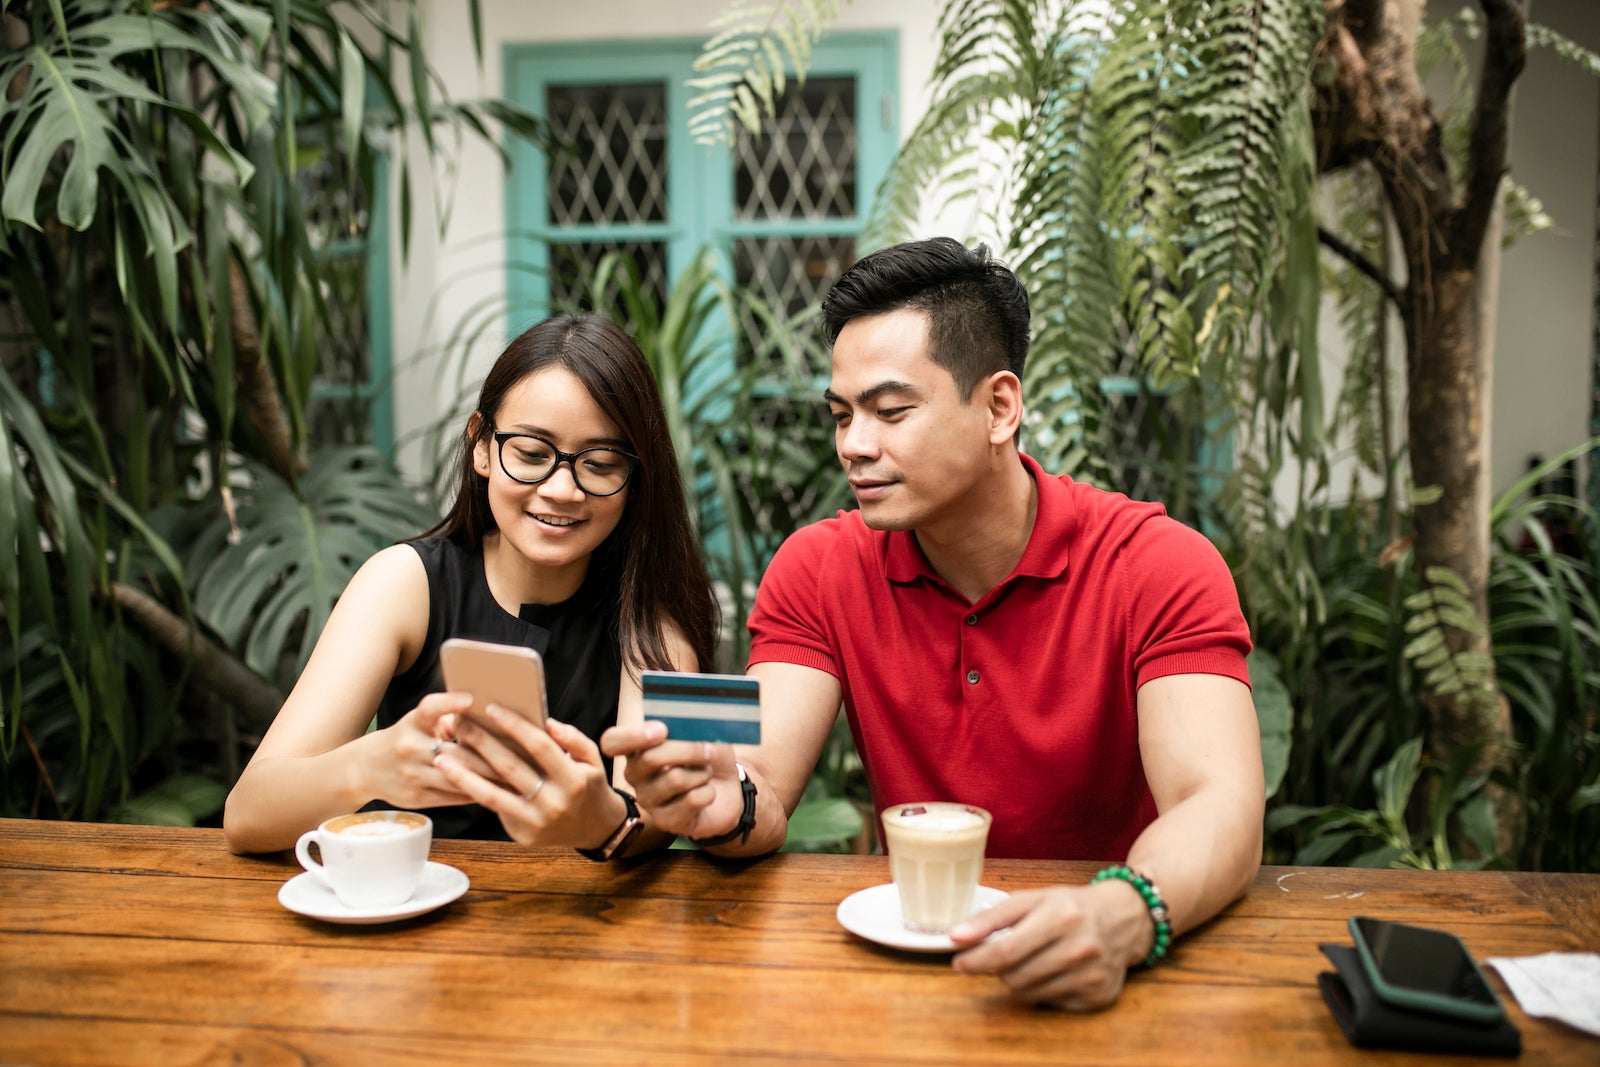 Beautiful adult couple at restaurant shopping online while man holds credit card both smiling